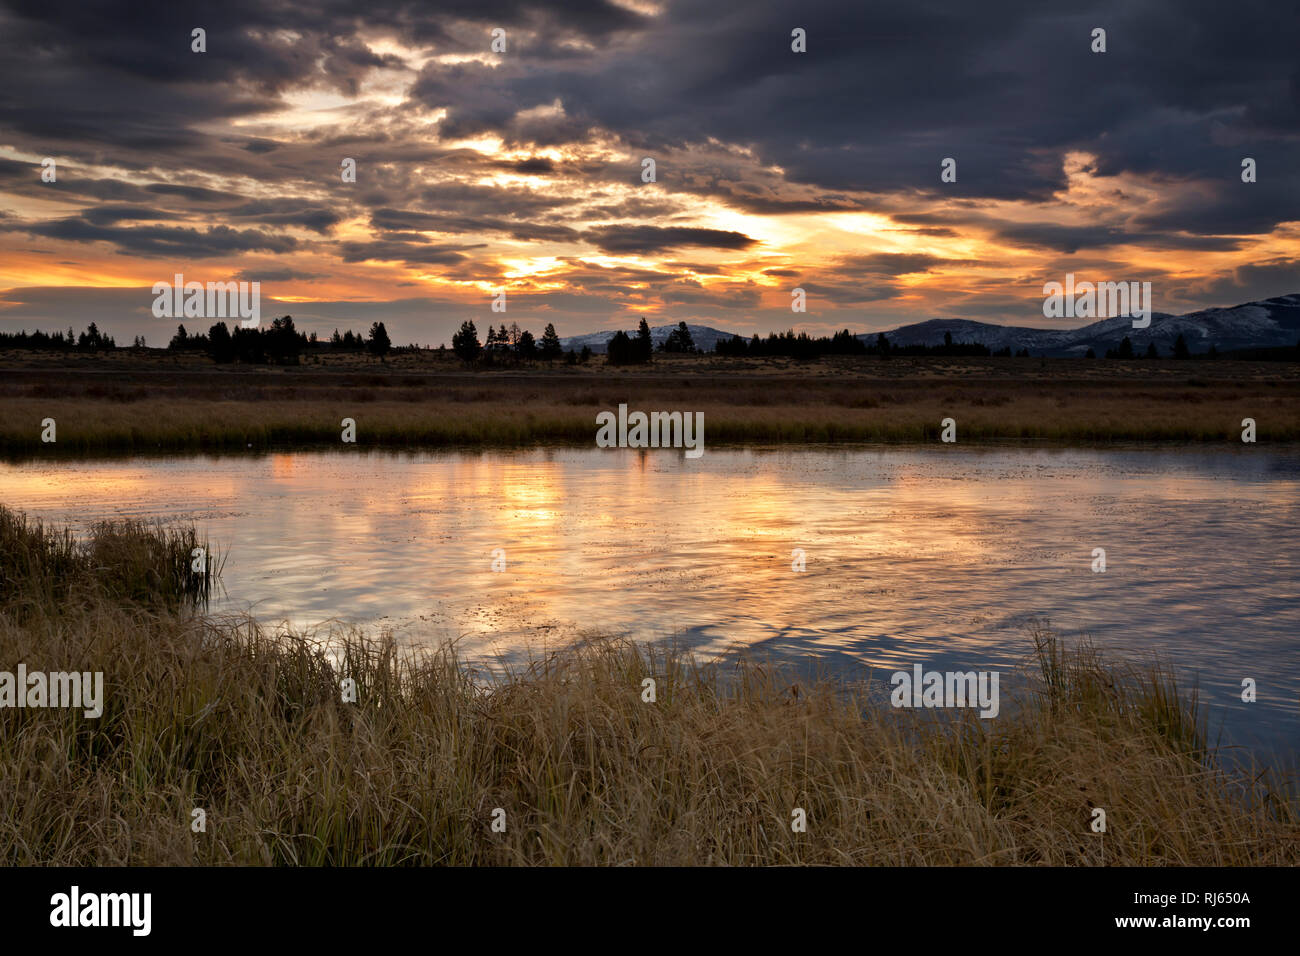 WY03133-00...WYOMING - Sunrise over Swan Lake located along the Mammoth - Norris Road in Yellowstone National Park. Stock Photo